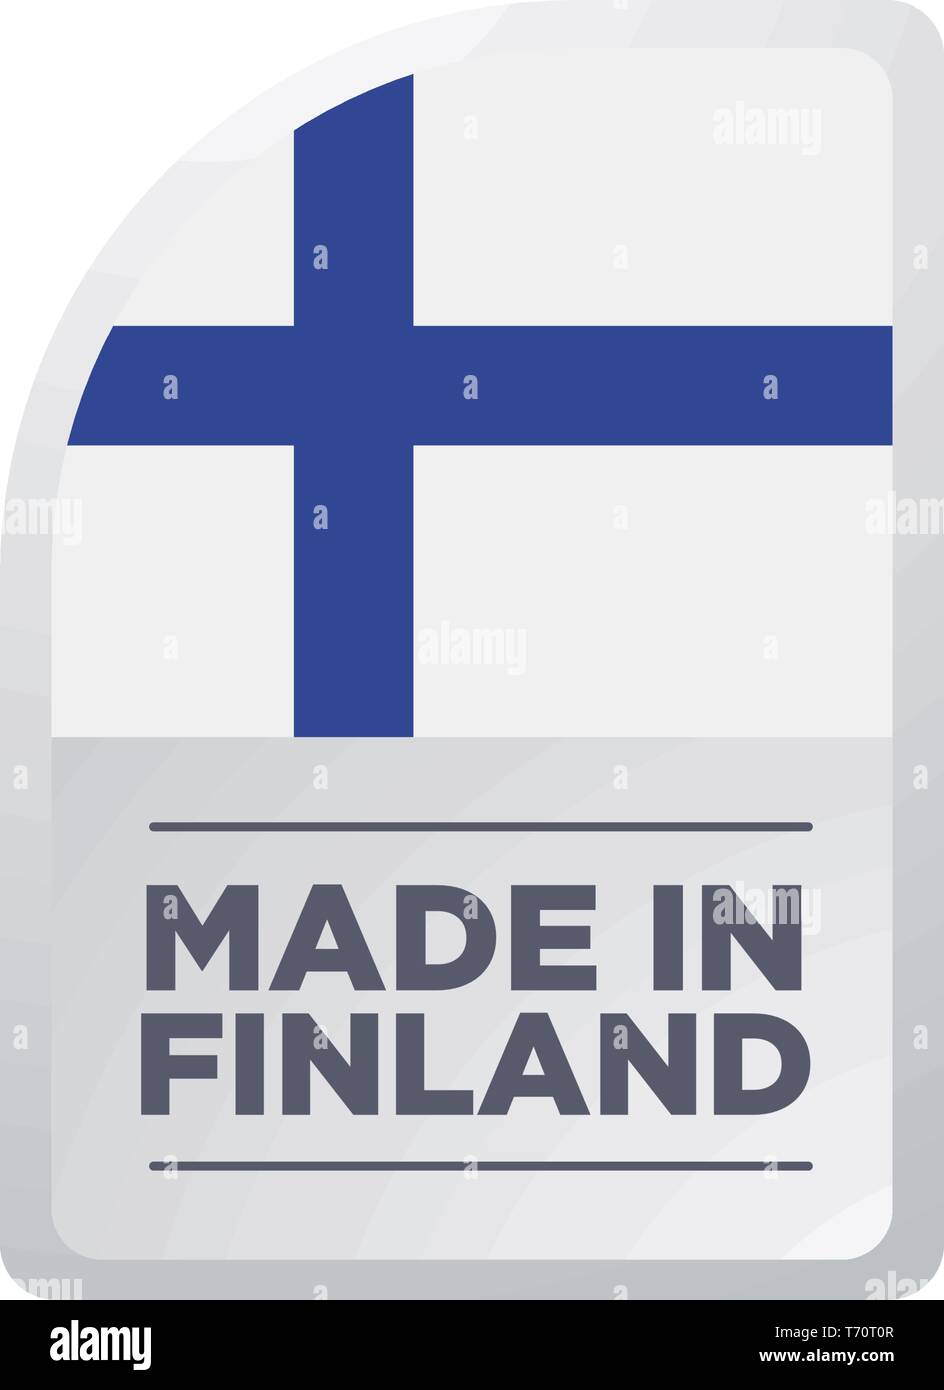 MADE IN FINLAND Stock Vector